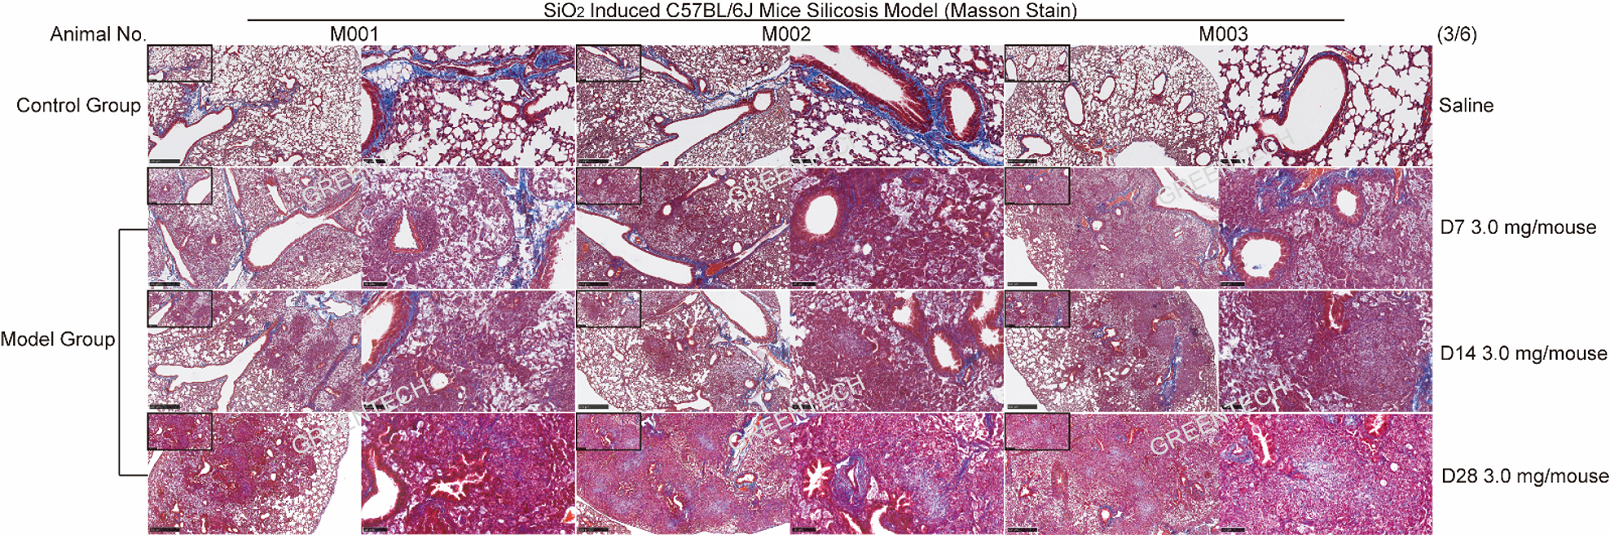 Lung section staining of silicon induced lung fibrosis model in mice.png